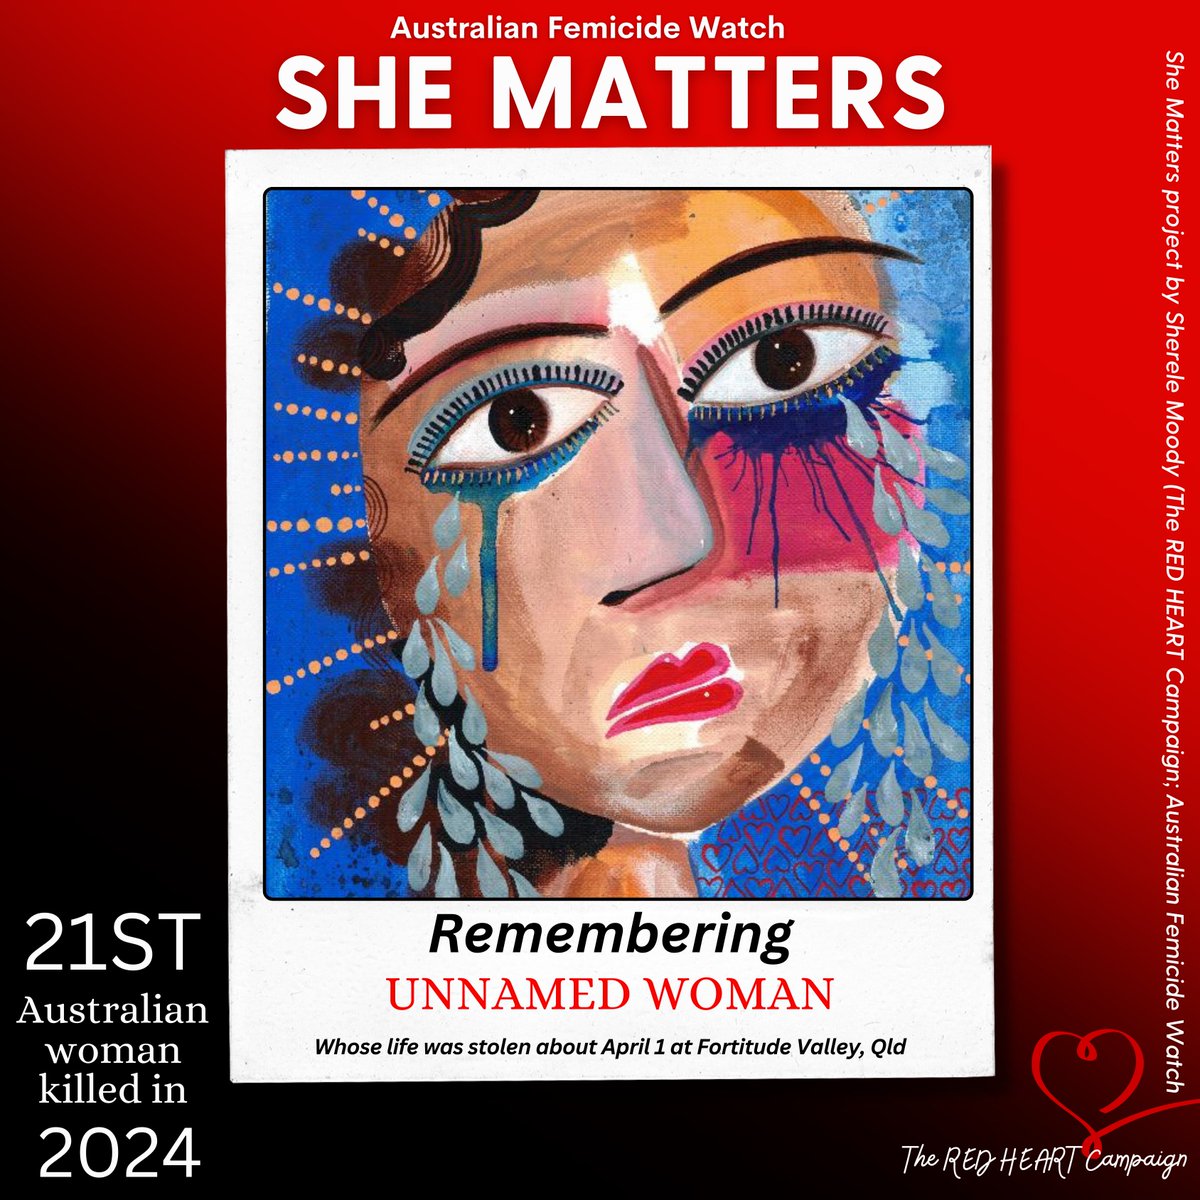 ❤️SHE MATTERS: UNNAMED WOMAN!❤️ On April 2, police undertook a welfare check at an apartment in Fortitude Valley, Queensland. Here they found the body on an unnamed 66-year-old woman. Her son has since been charged with her murder. She is the 21st Australian woman killed this